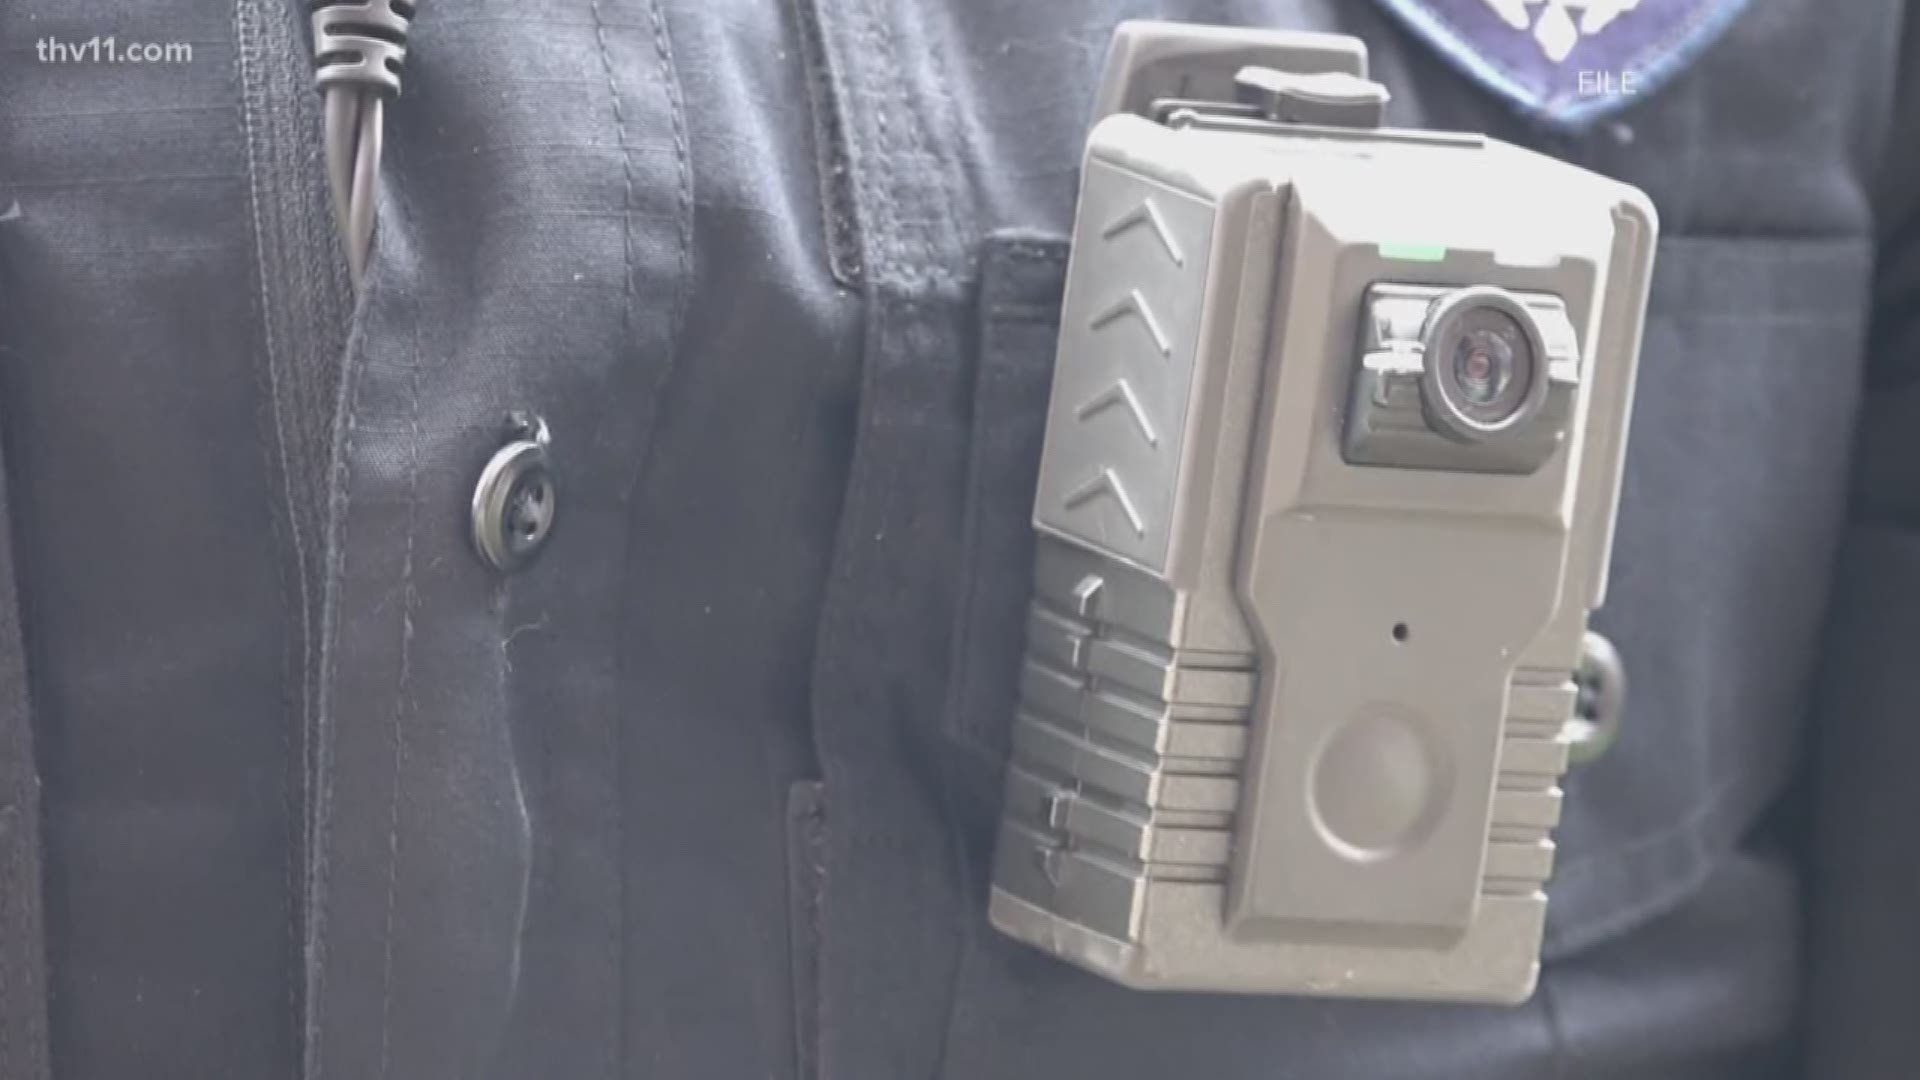 The Little Rock Police Department got some good news this week. Officers are one step closer to getting body cameras.